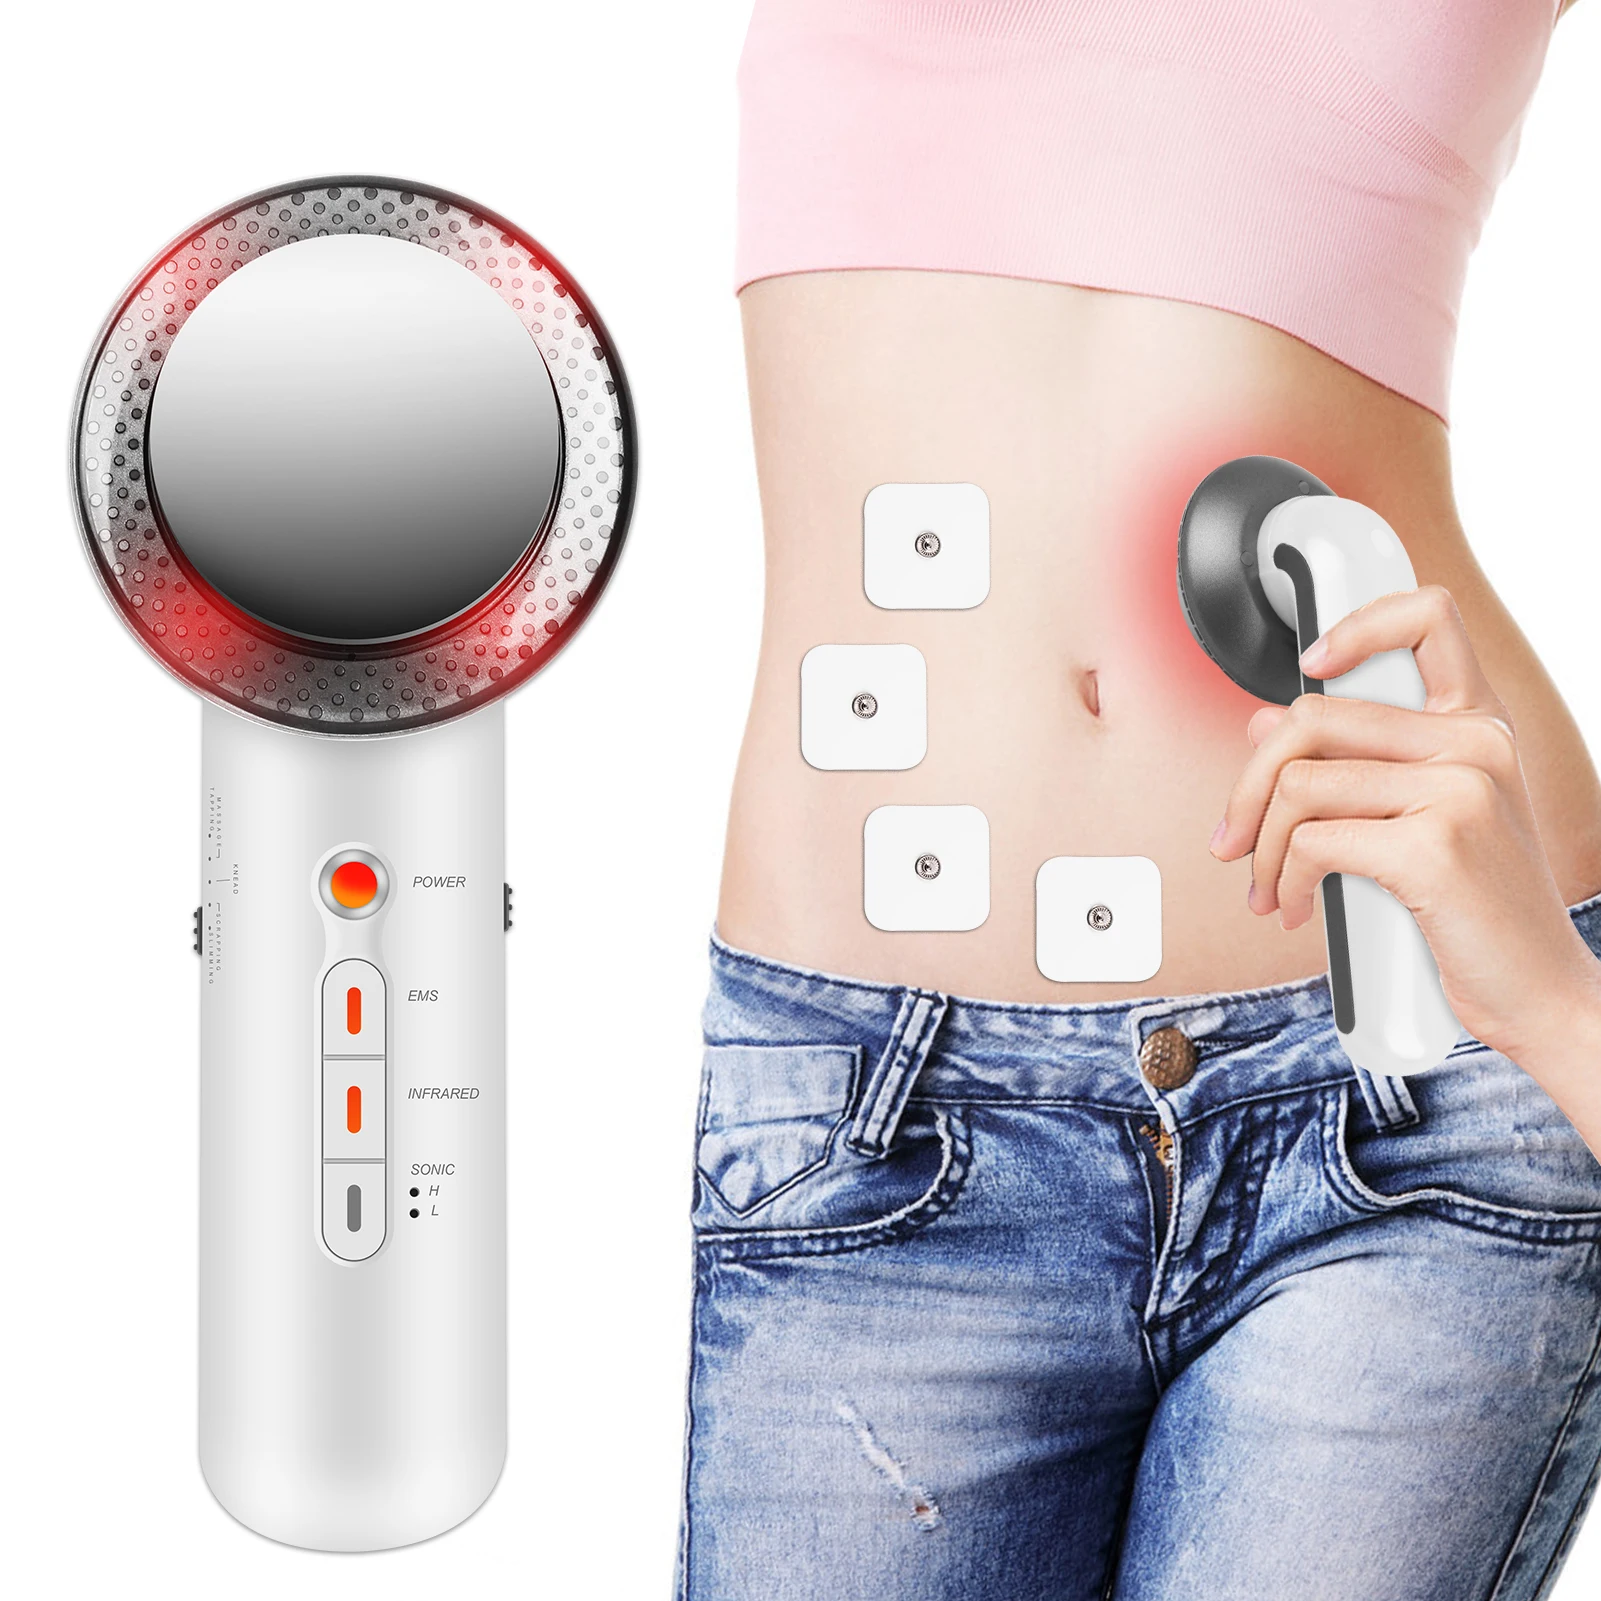 

Face Reduction 3 in 1 EMS Infrared Ultrasonic body Massager Anti cellulite Fat Burner Weight Loss Infrared Slimming Machine Slim